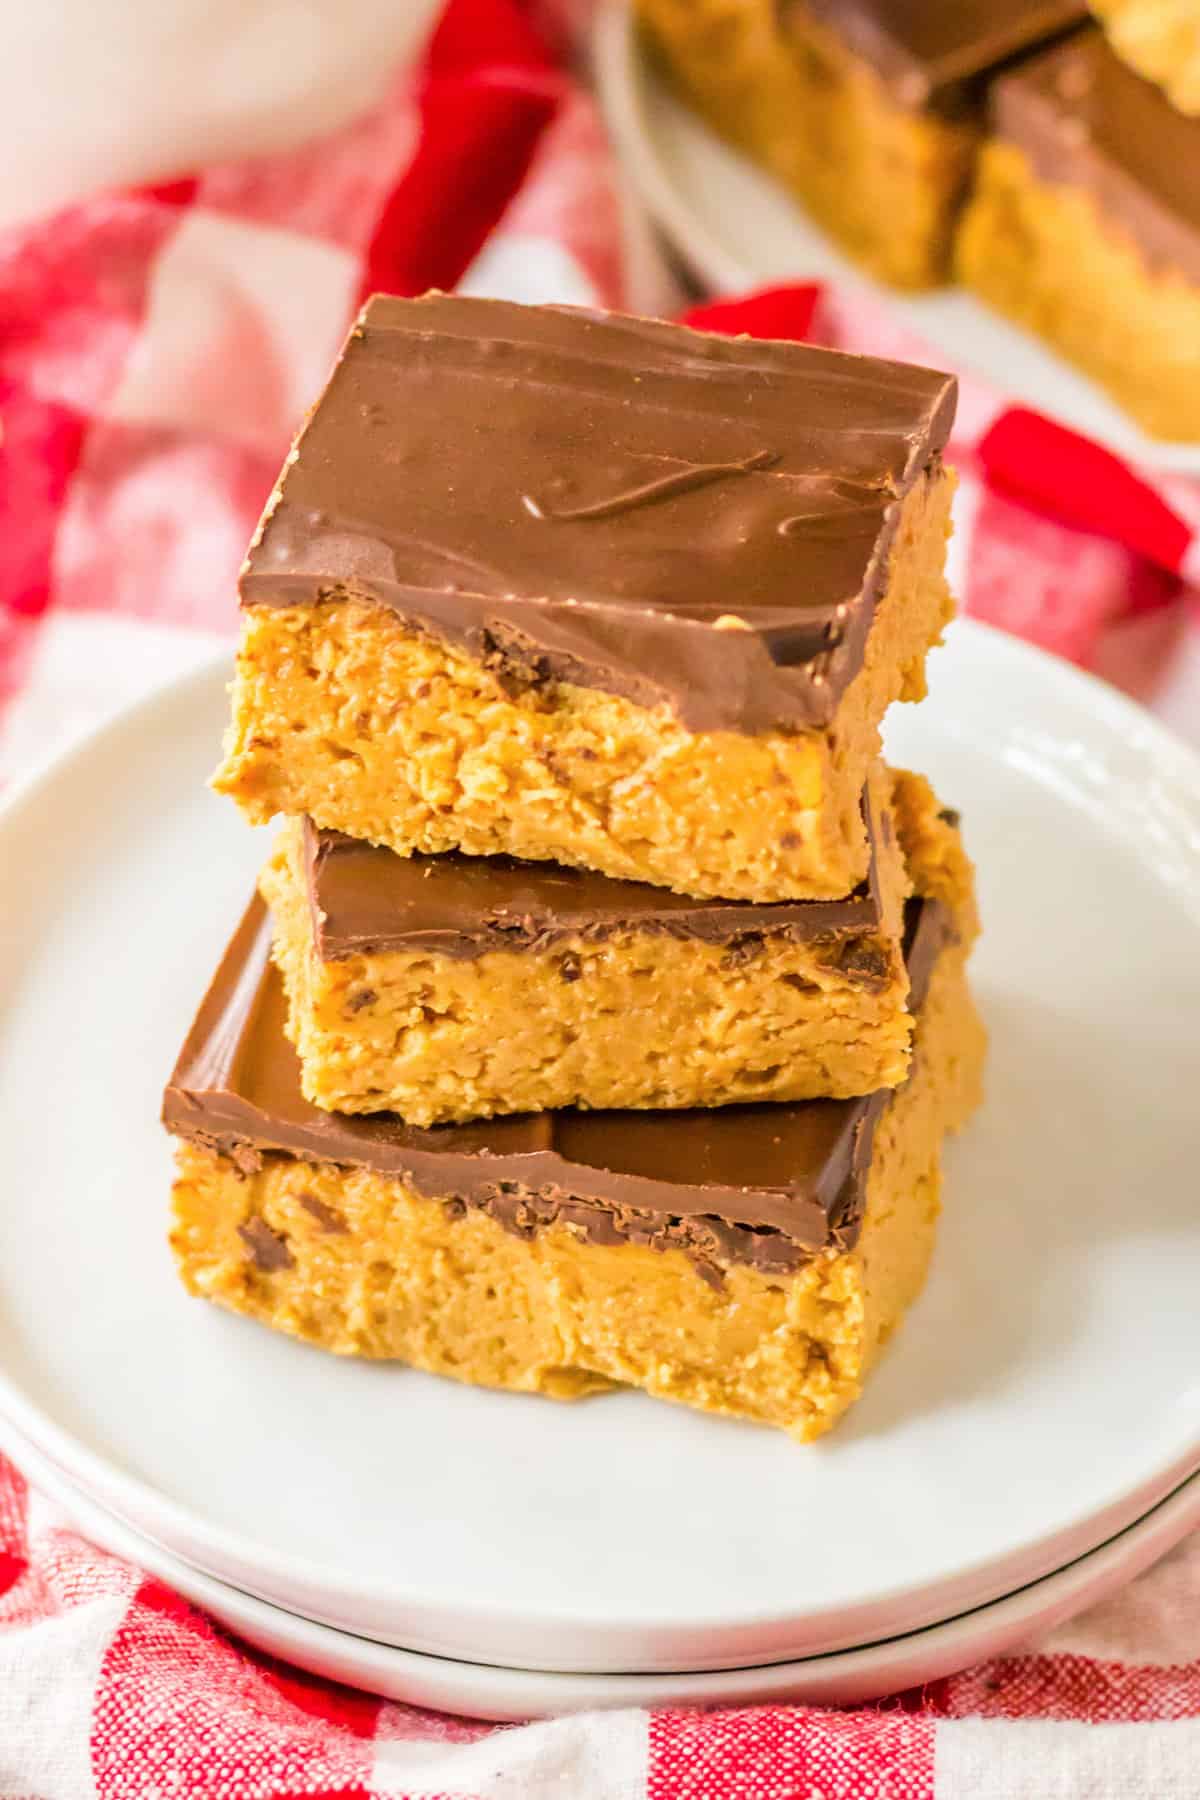 Three easy no bake peanut butter bars topped with a thin layer of chocolate.
